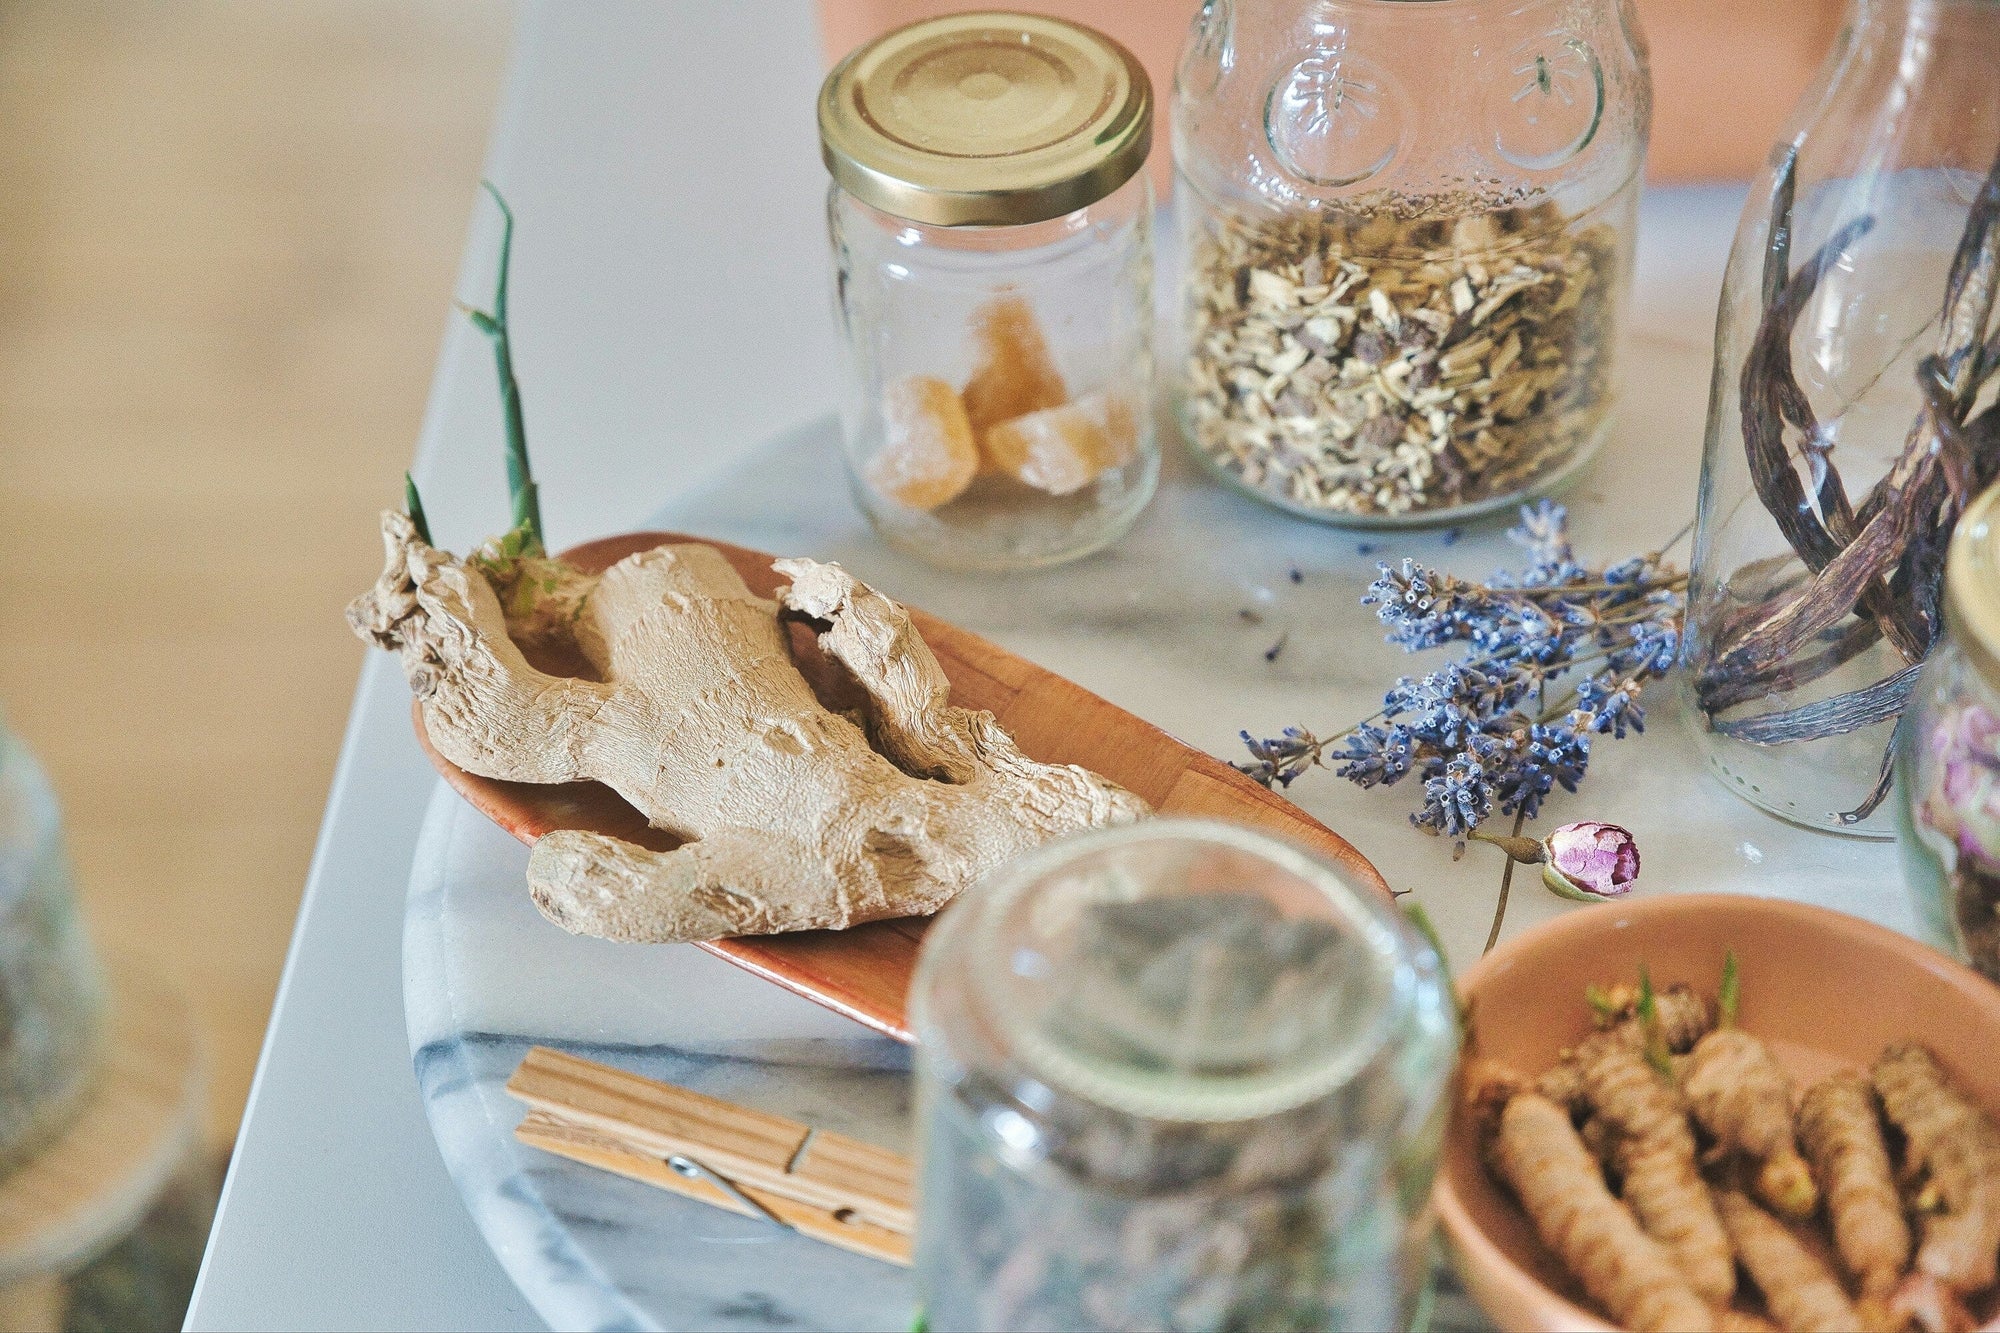 How to Manage PCOS With Herbs